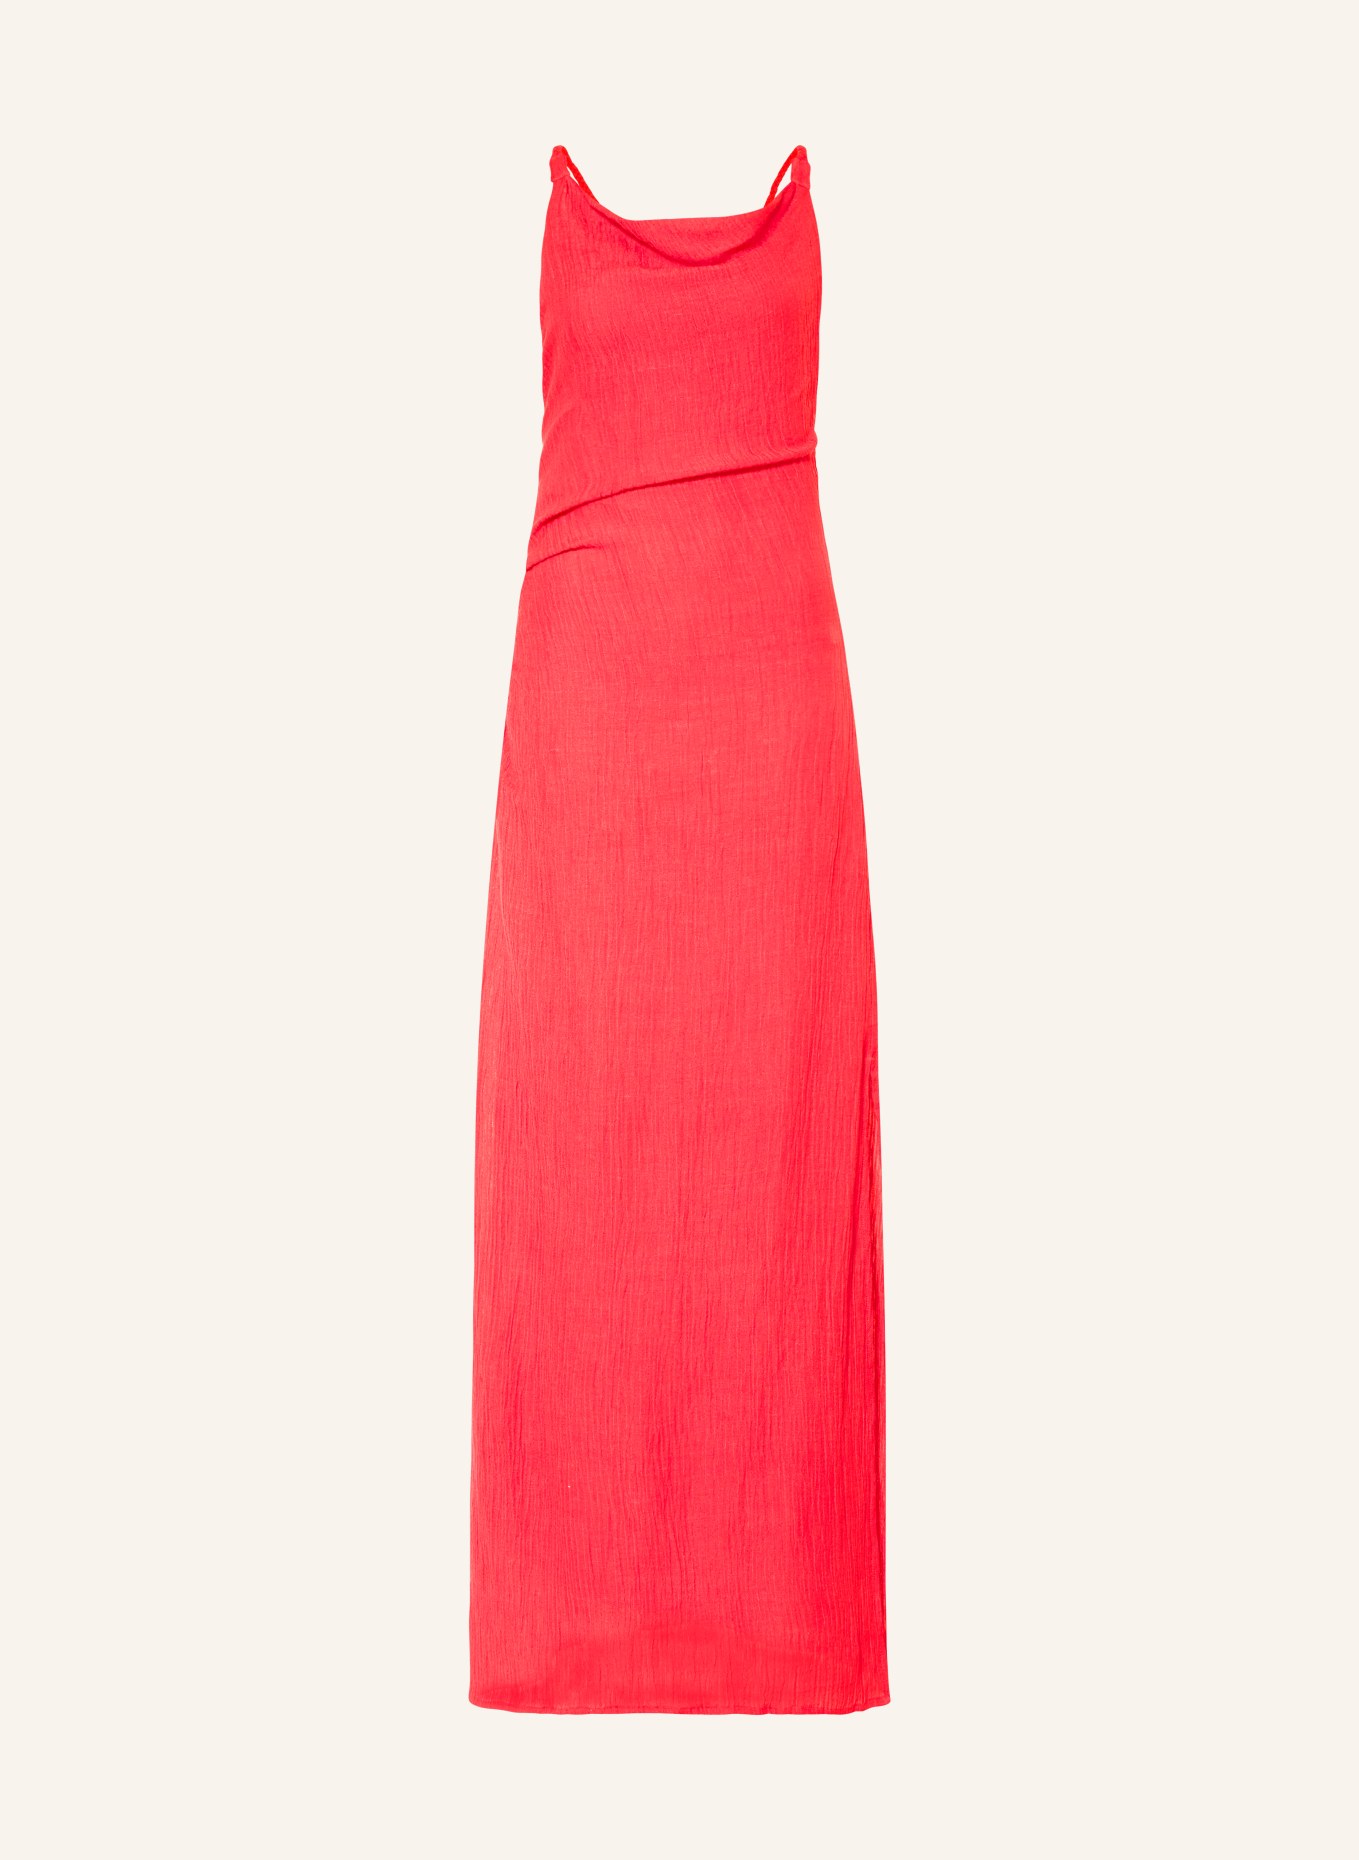 FAITHFULL THE BRAND Dress PALERMO in red